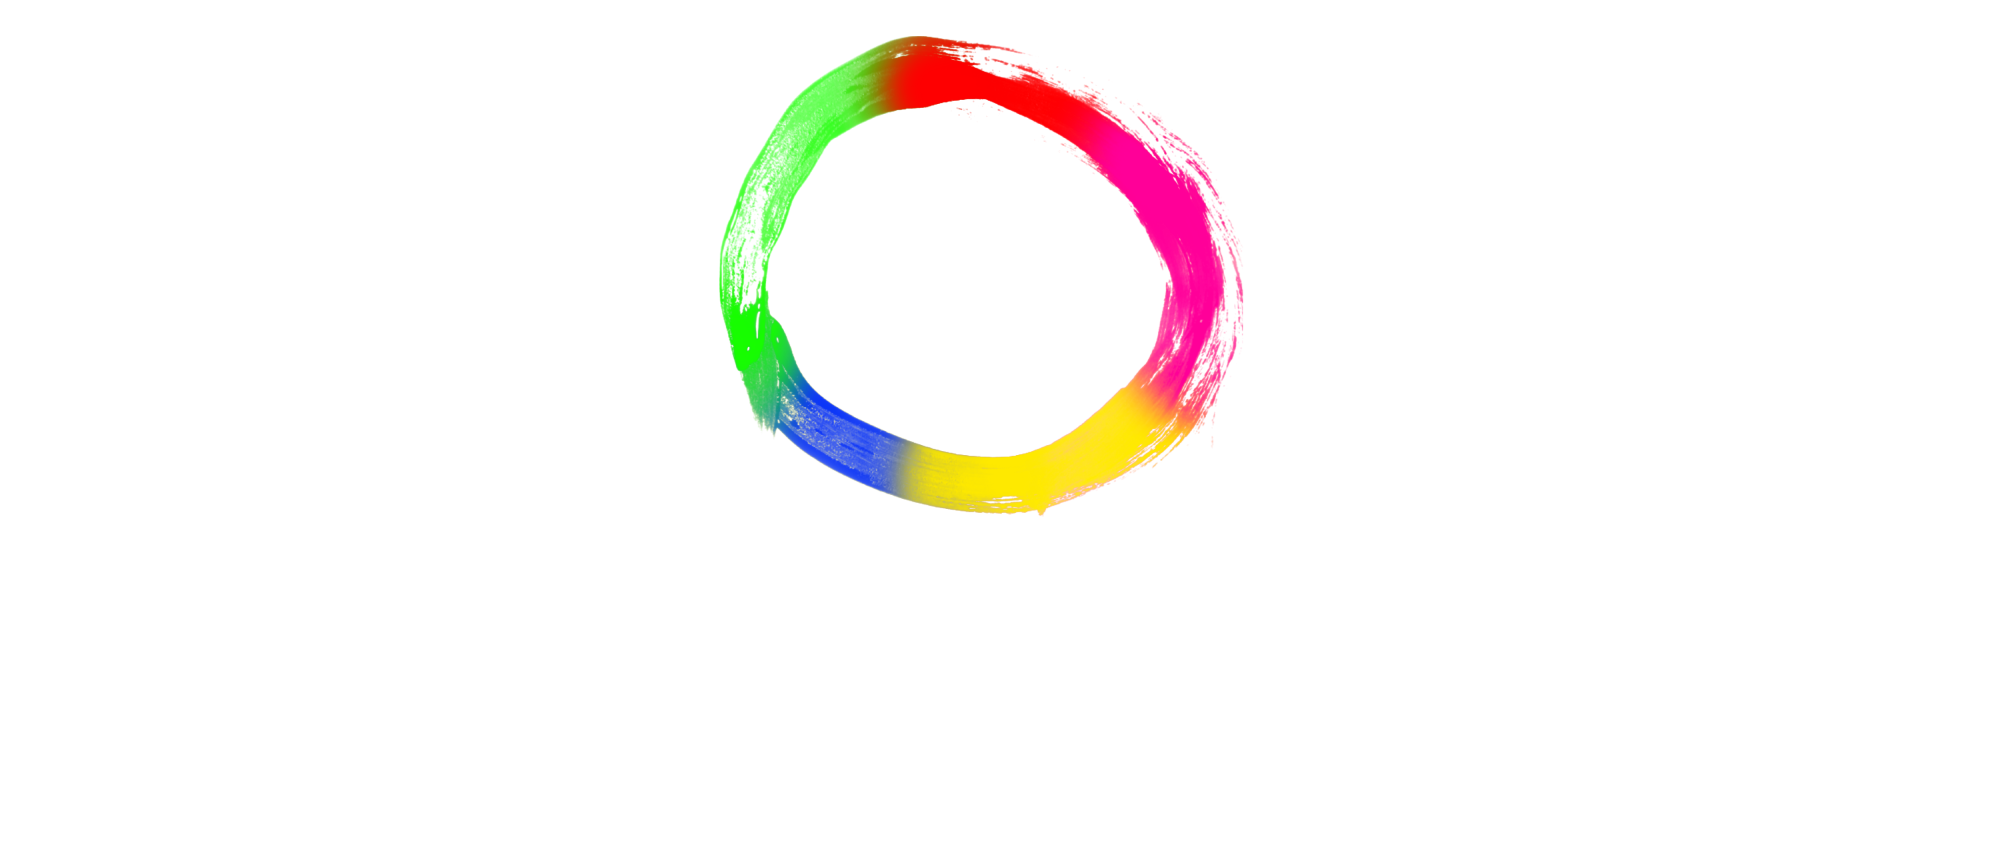 One Athletica